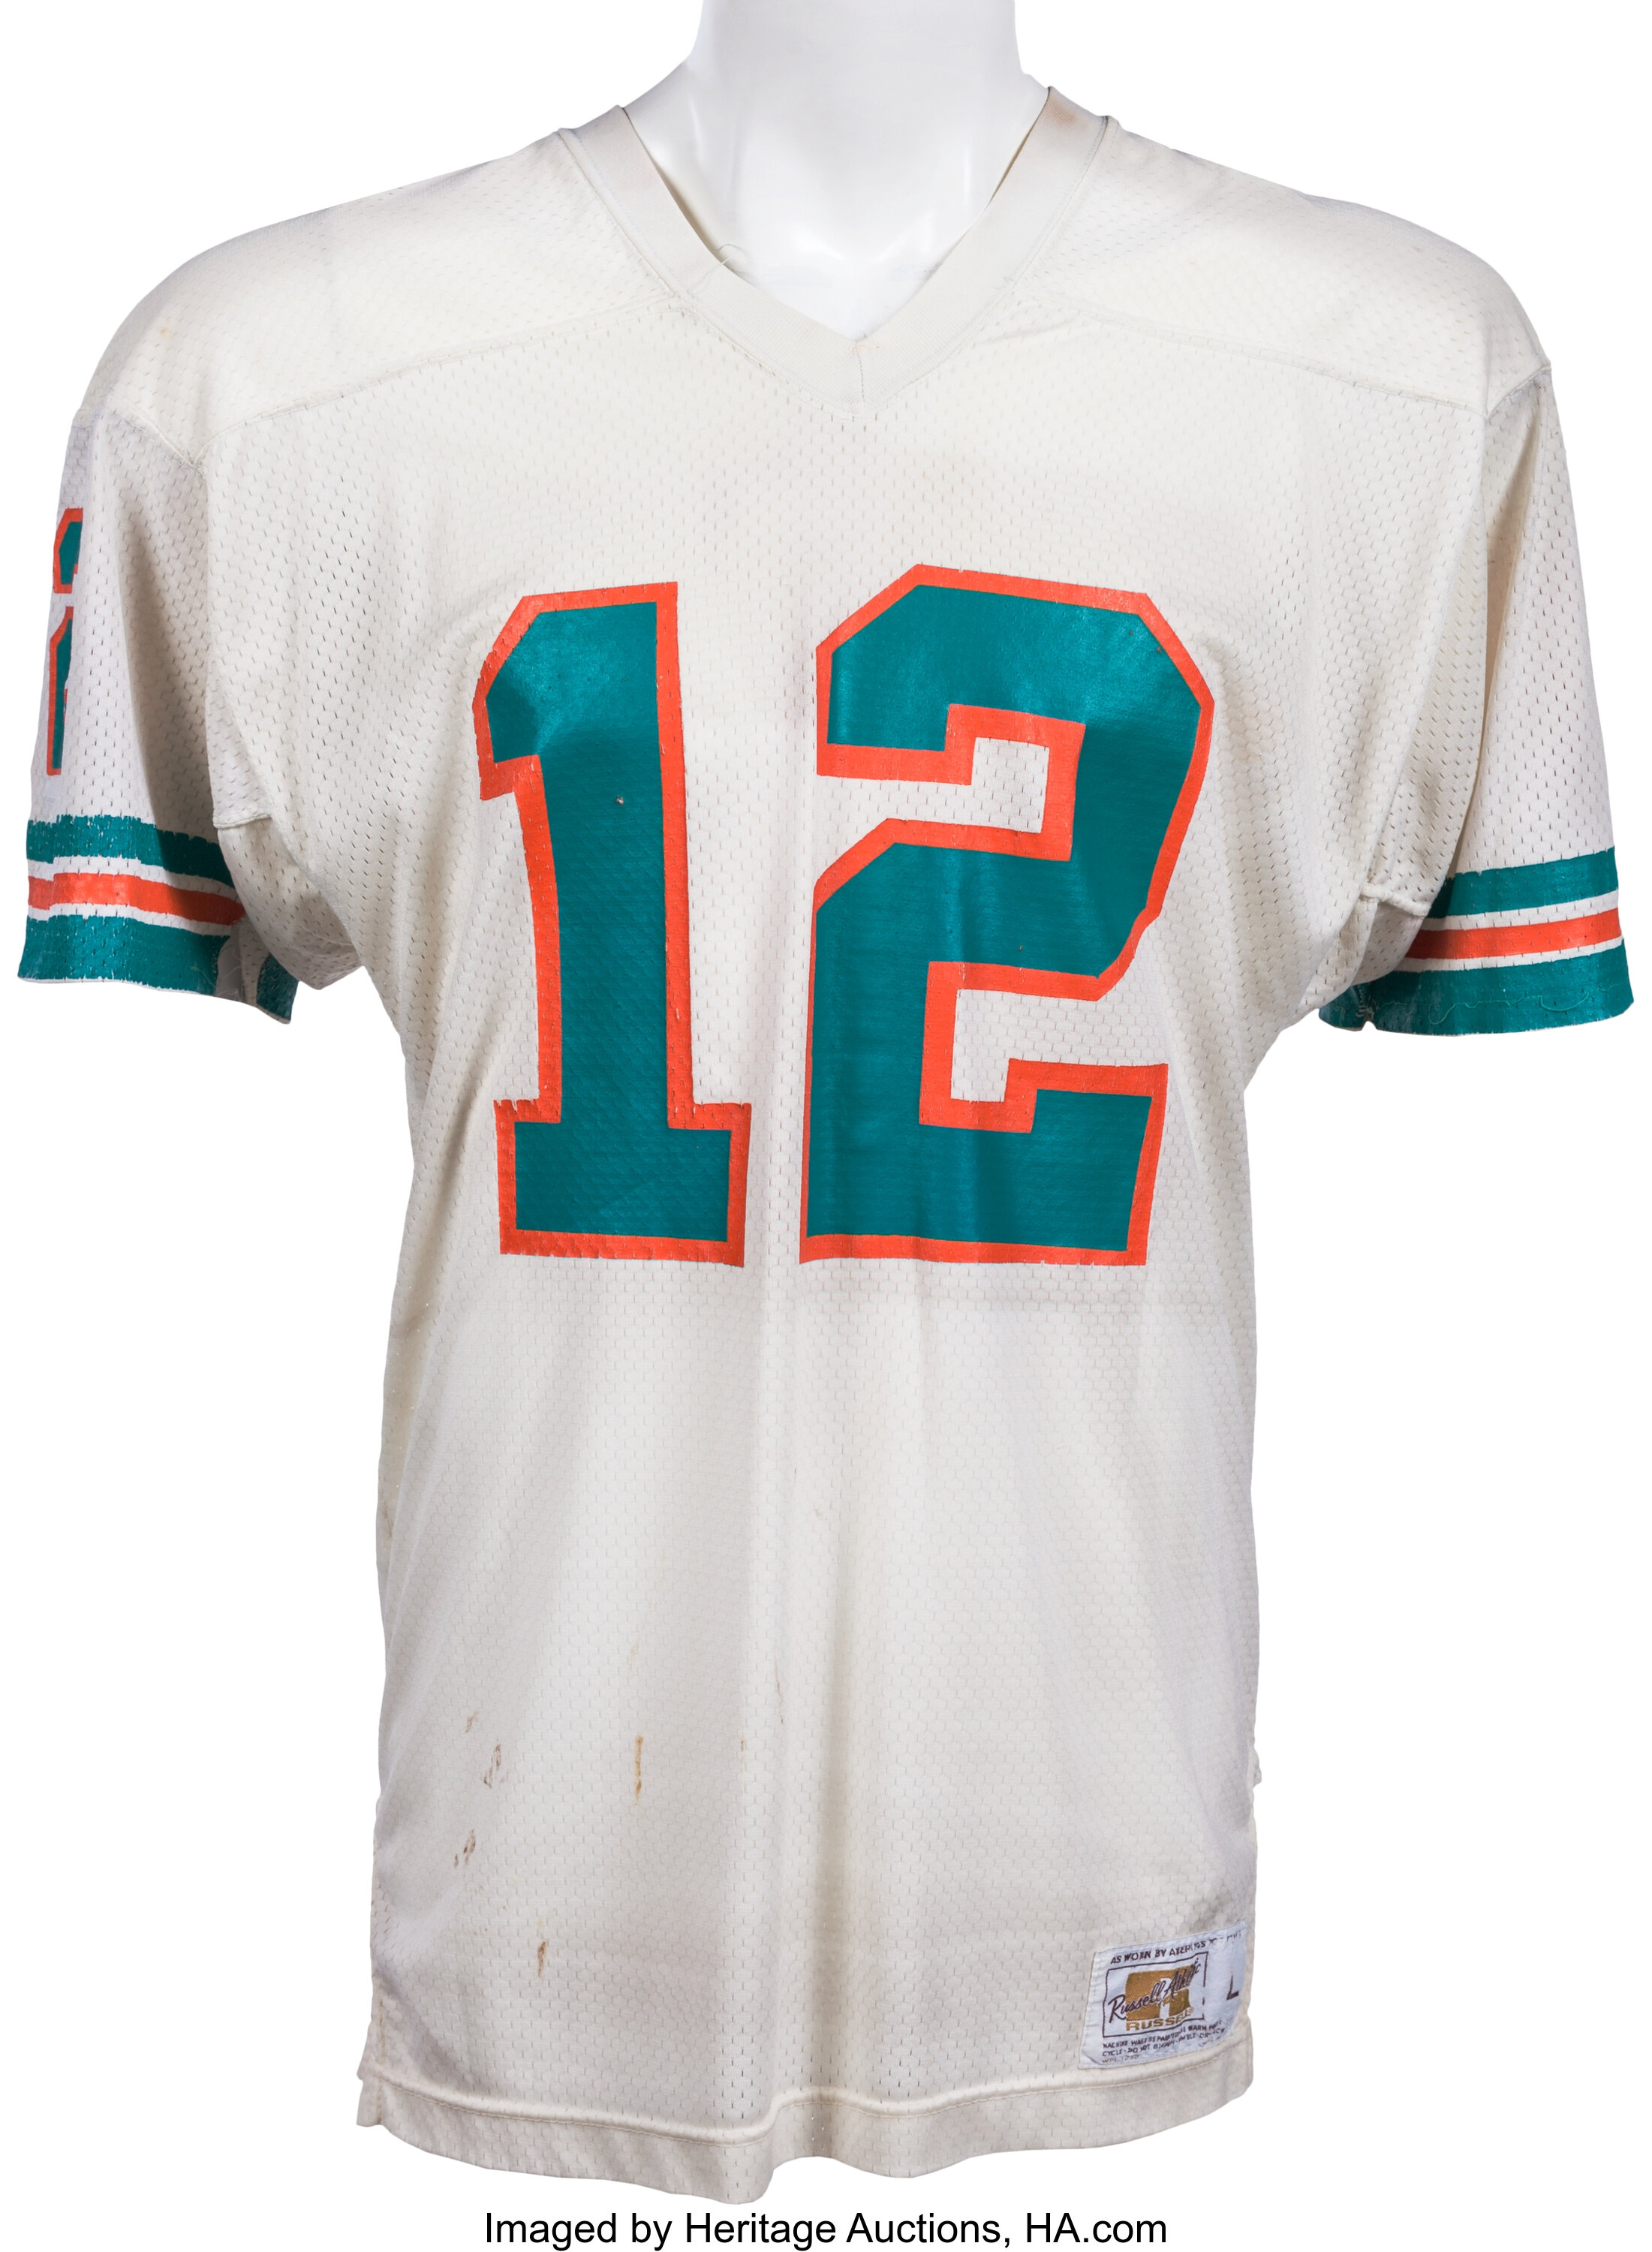 1978-80 Bob Griese Game Worn Miami Dolphins Jersey, MEARS A10